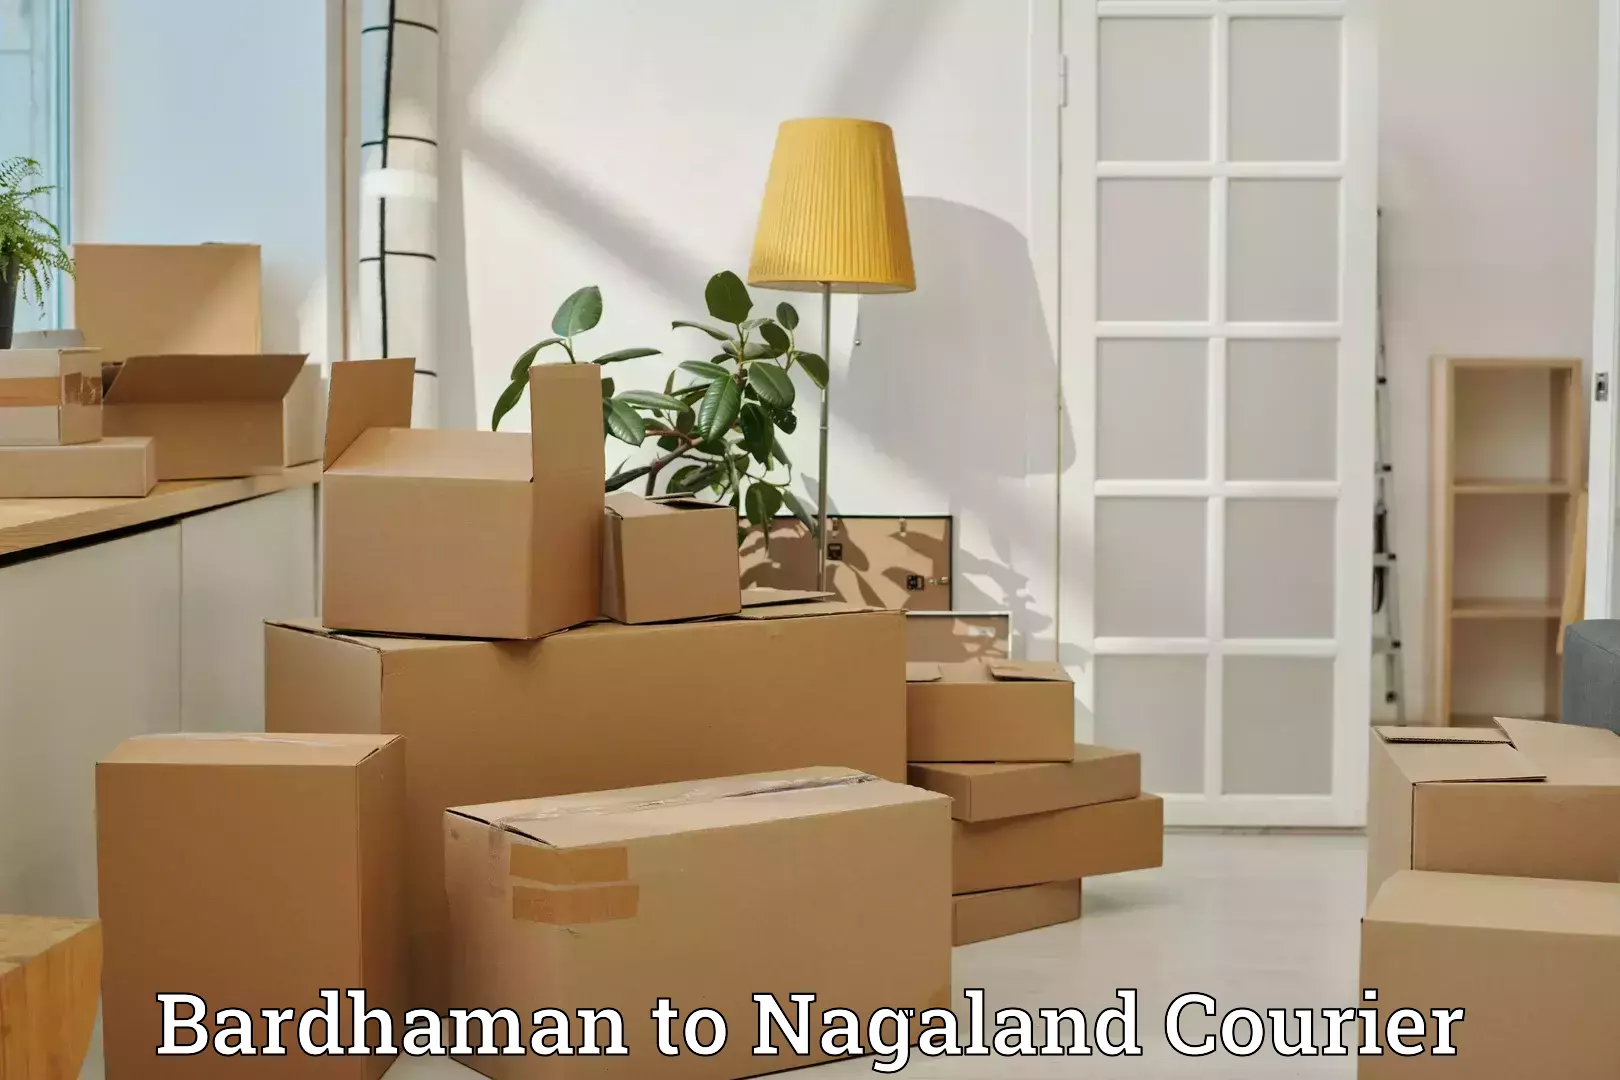 Domestic luggage transport in Bardhaman to Nagaland